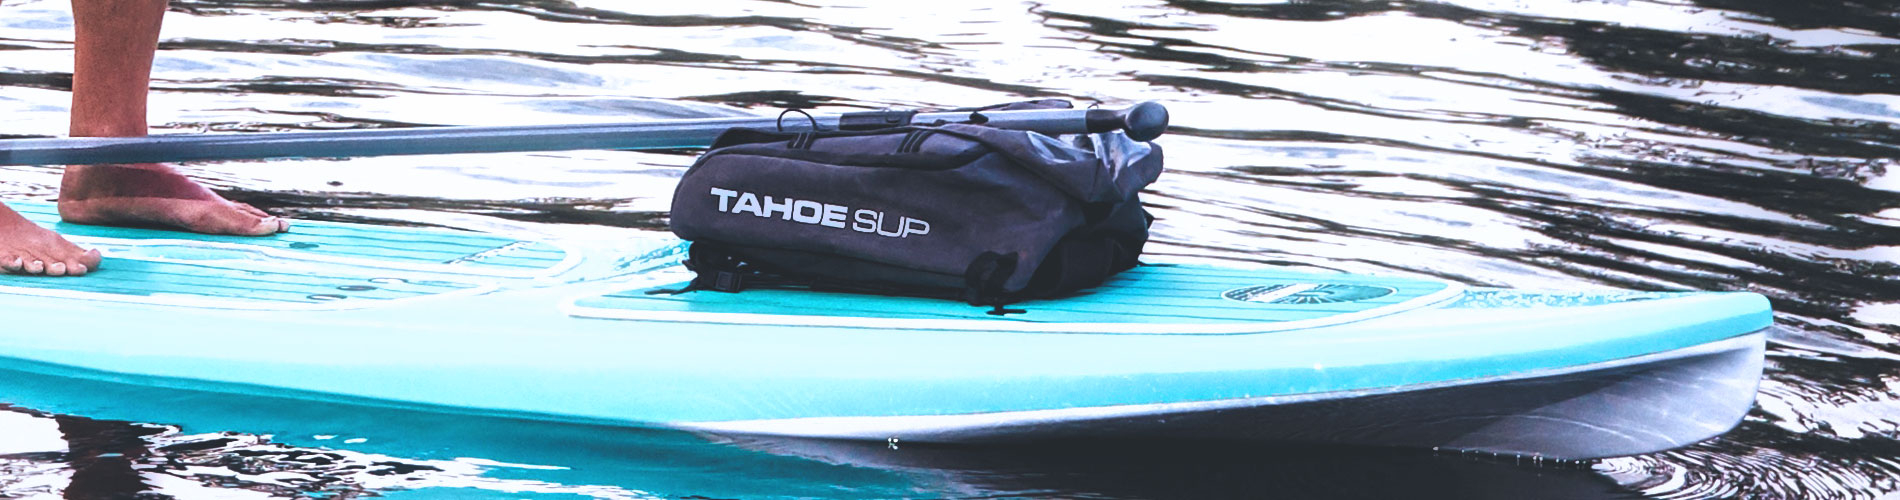 Touring Standup Paddle Board Supack Storage Deck Bag Tahoe Sup pertaining to proportions 1900 X 500